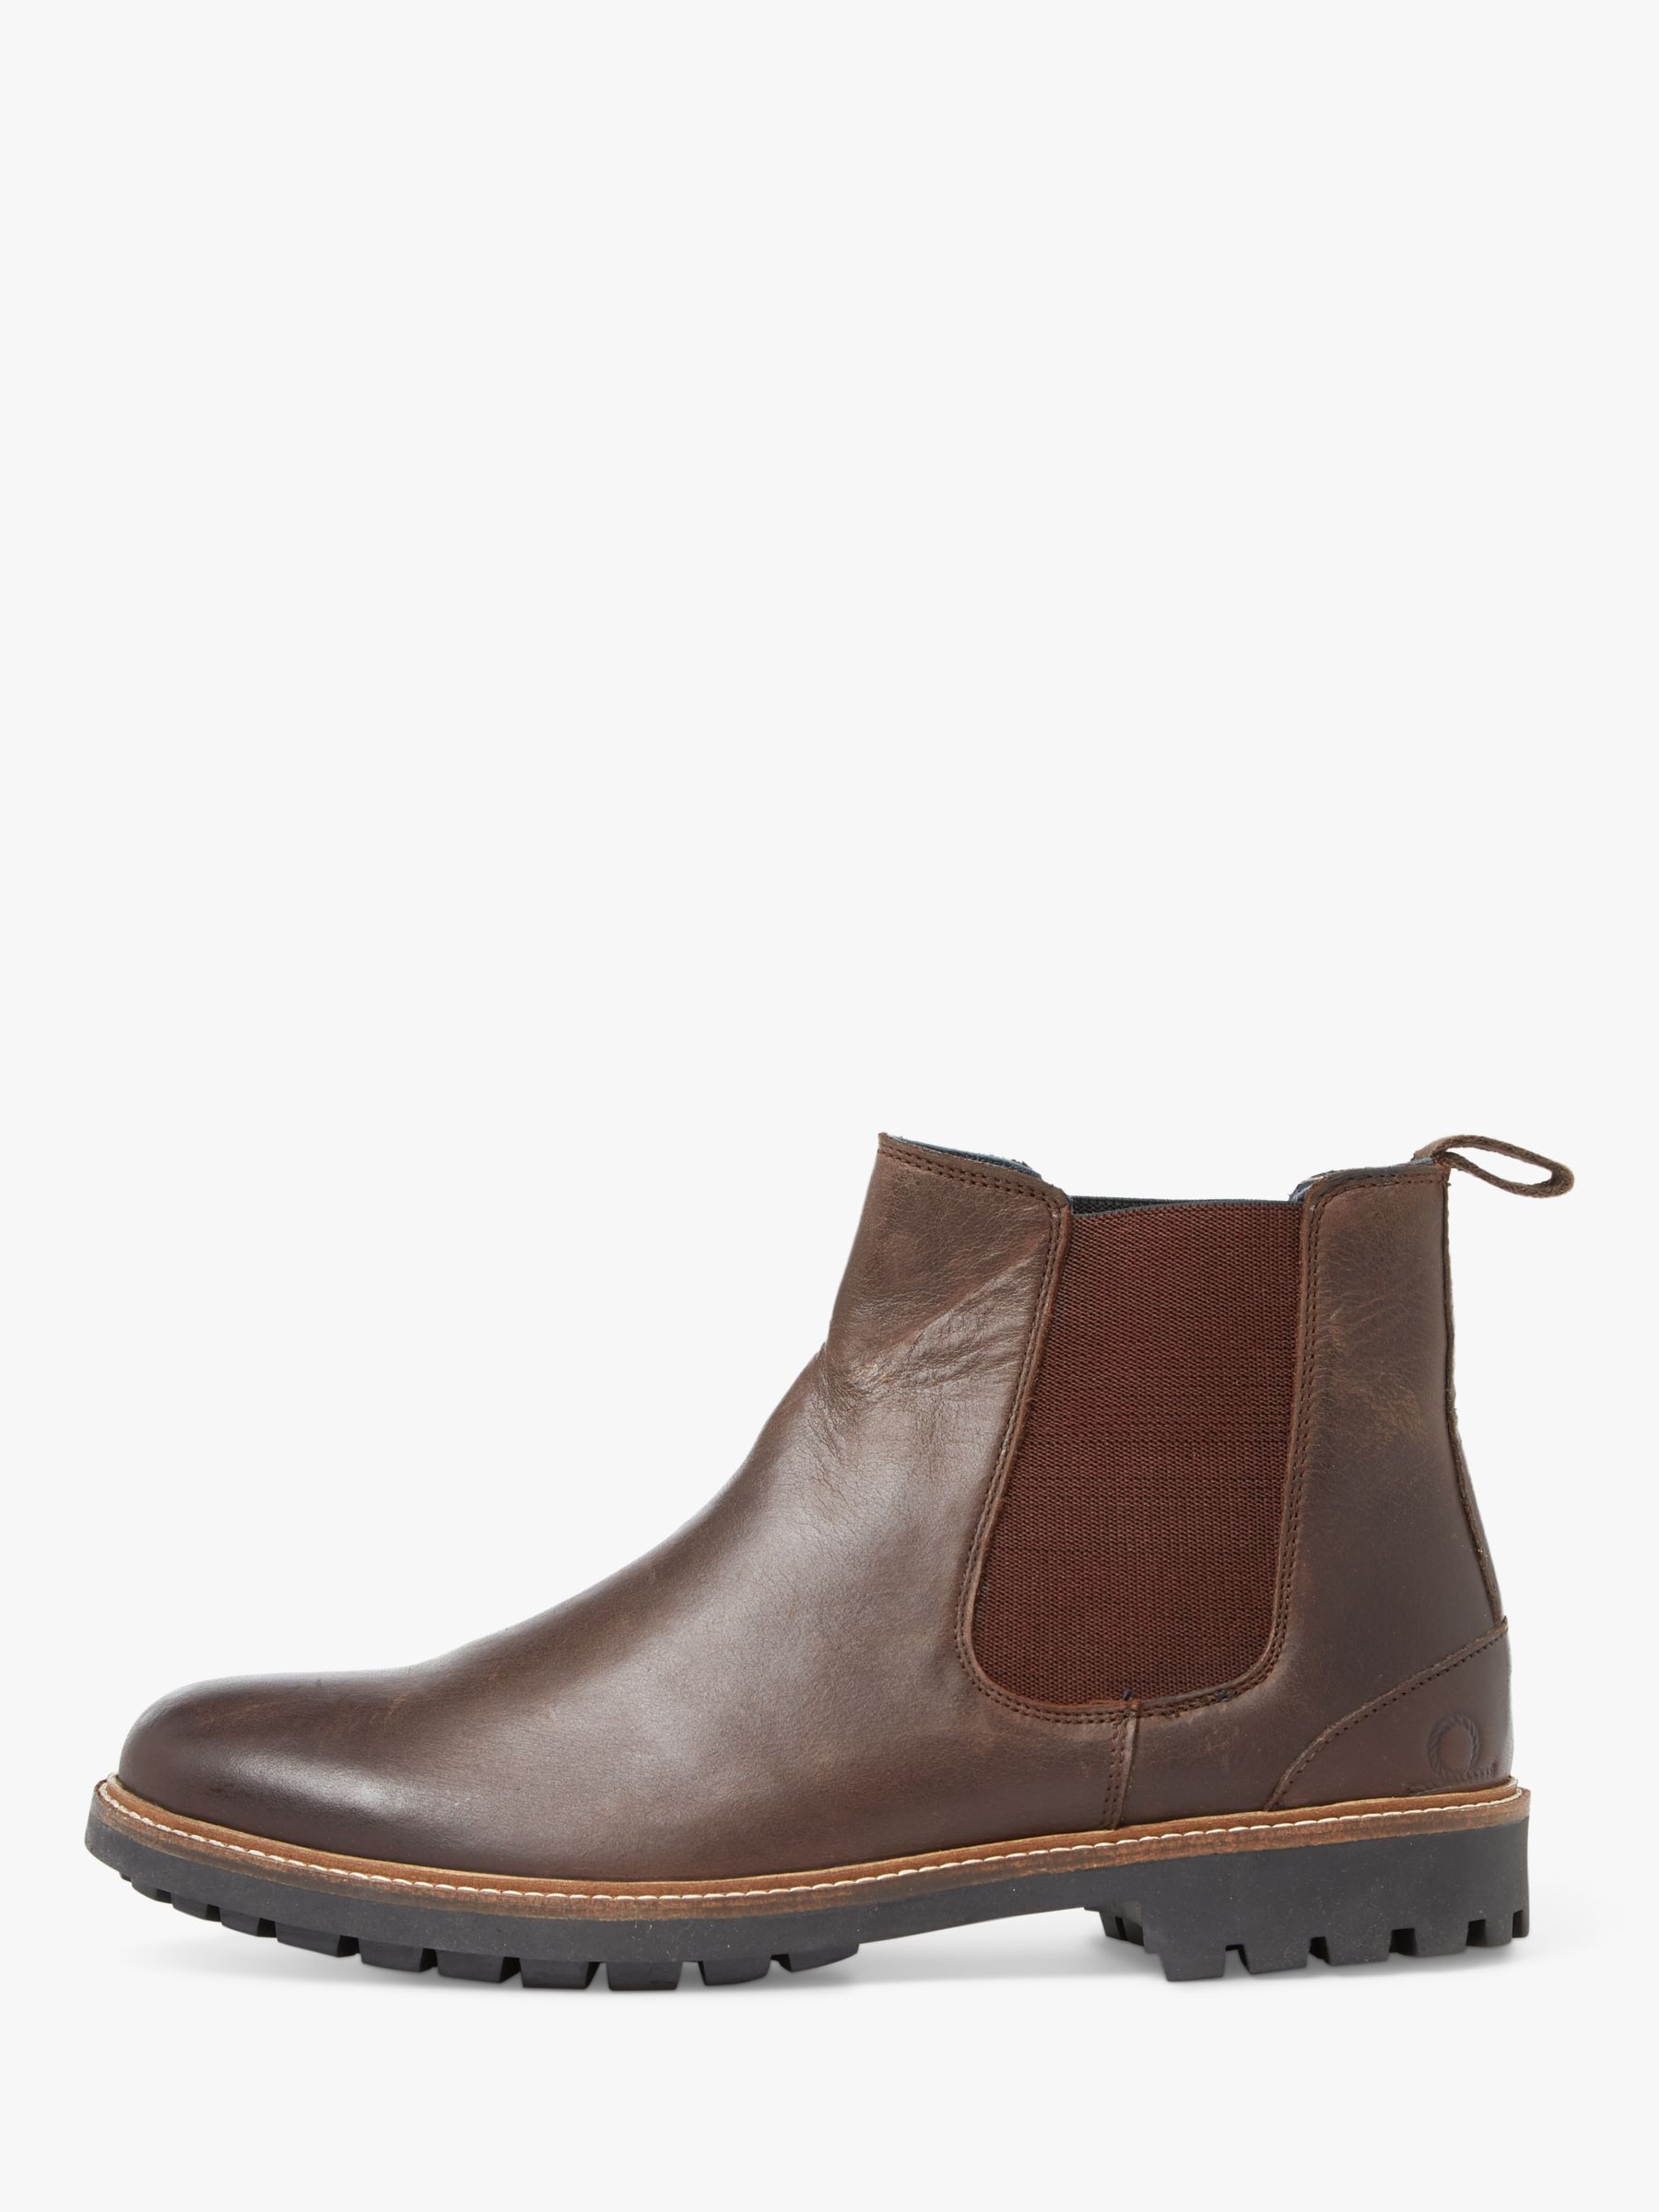 Chatham Chirk Leather Chelsea Boots, Brown at John Lewis & Partners